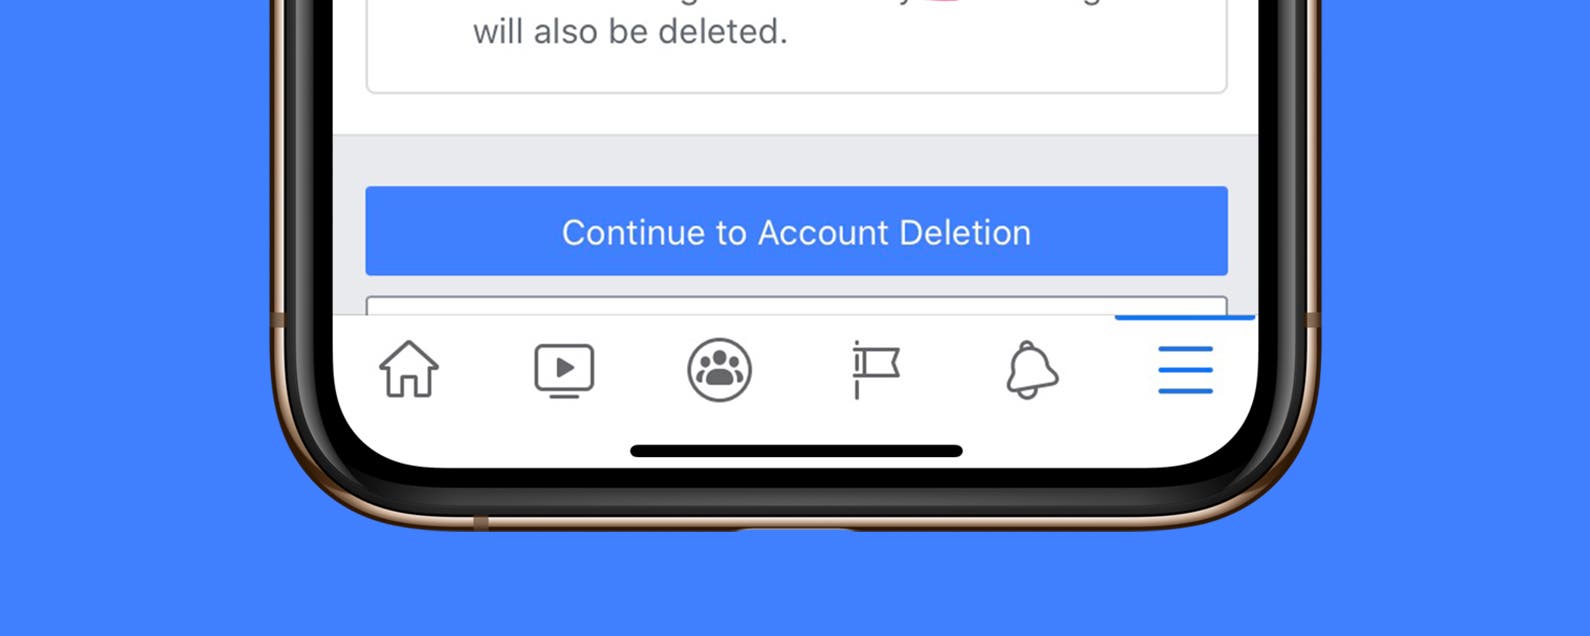 How to Deactivate or Delete Facebook on the iPhone